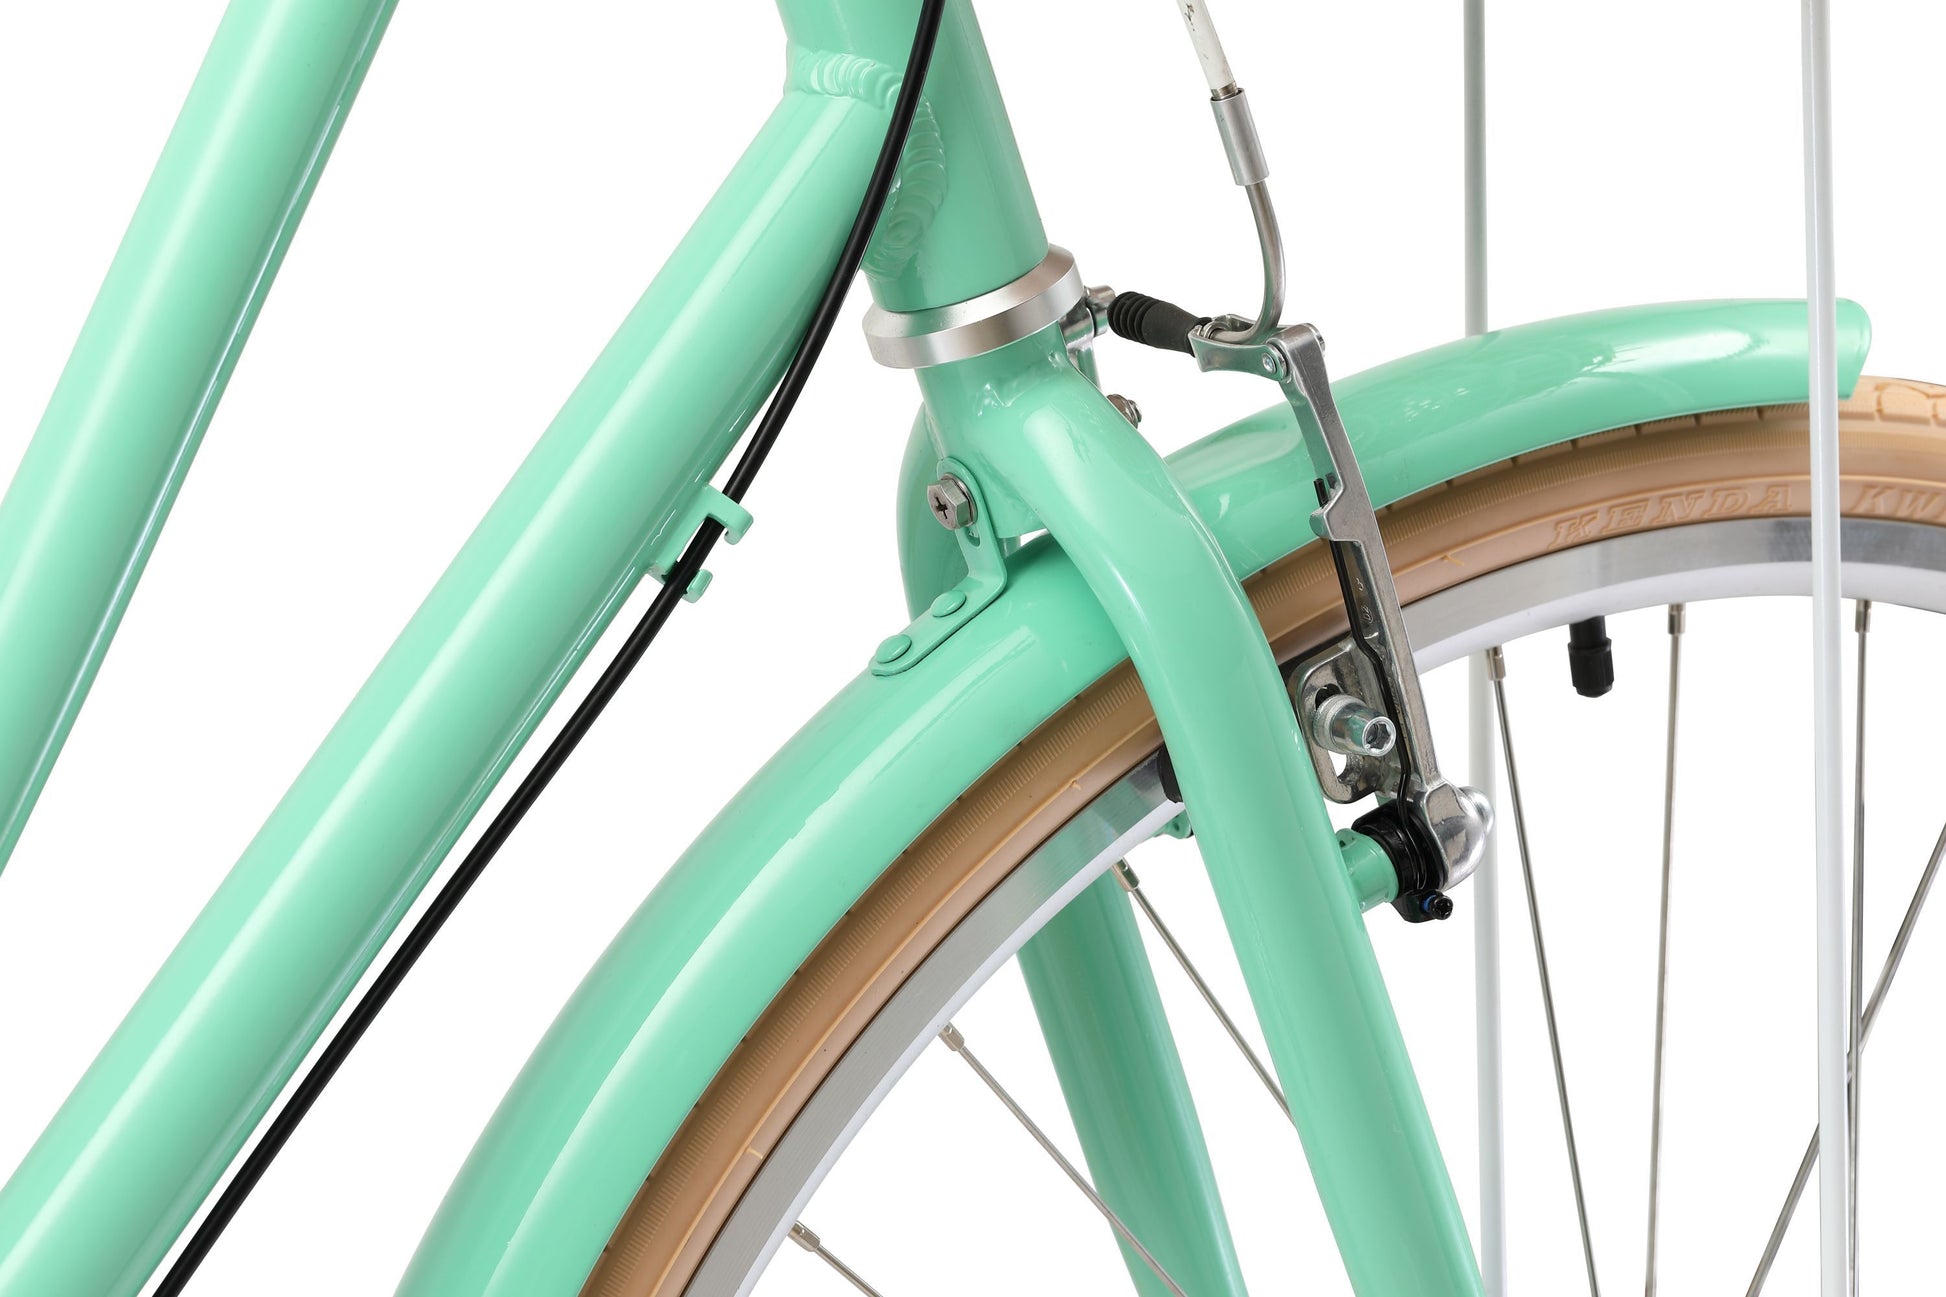 Ladies Deluxe Vintage Bike in Mint Green showing Tektro front V-brakes from Reid Cycles Australia